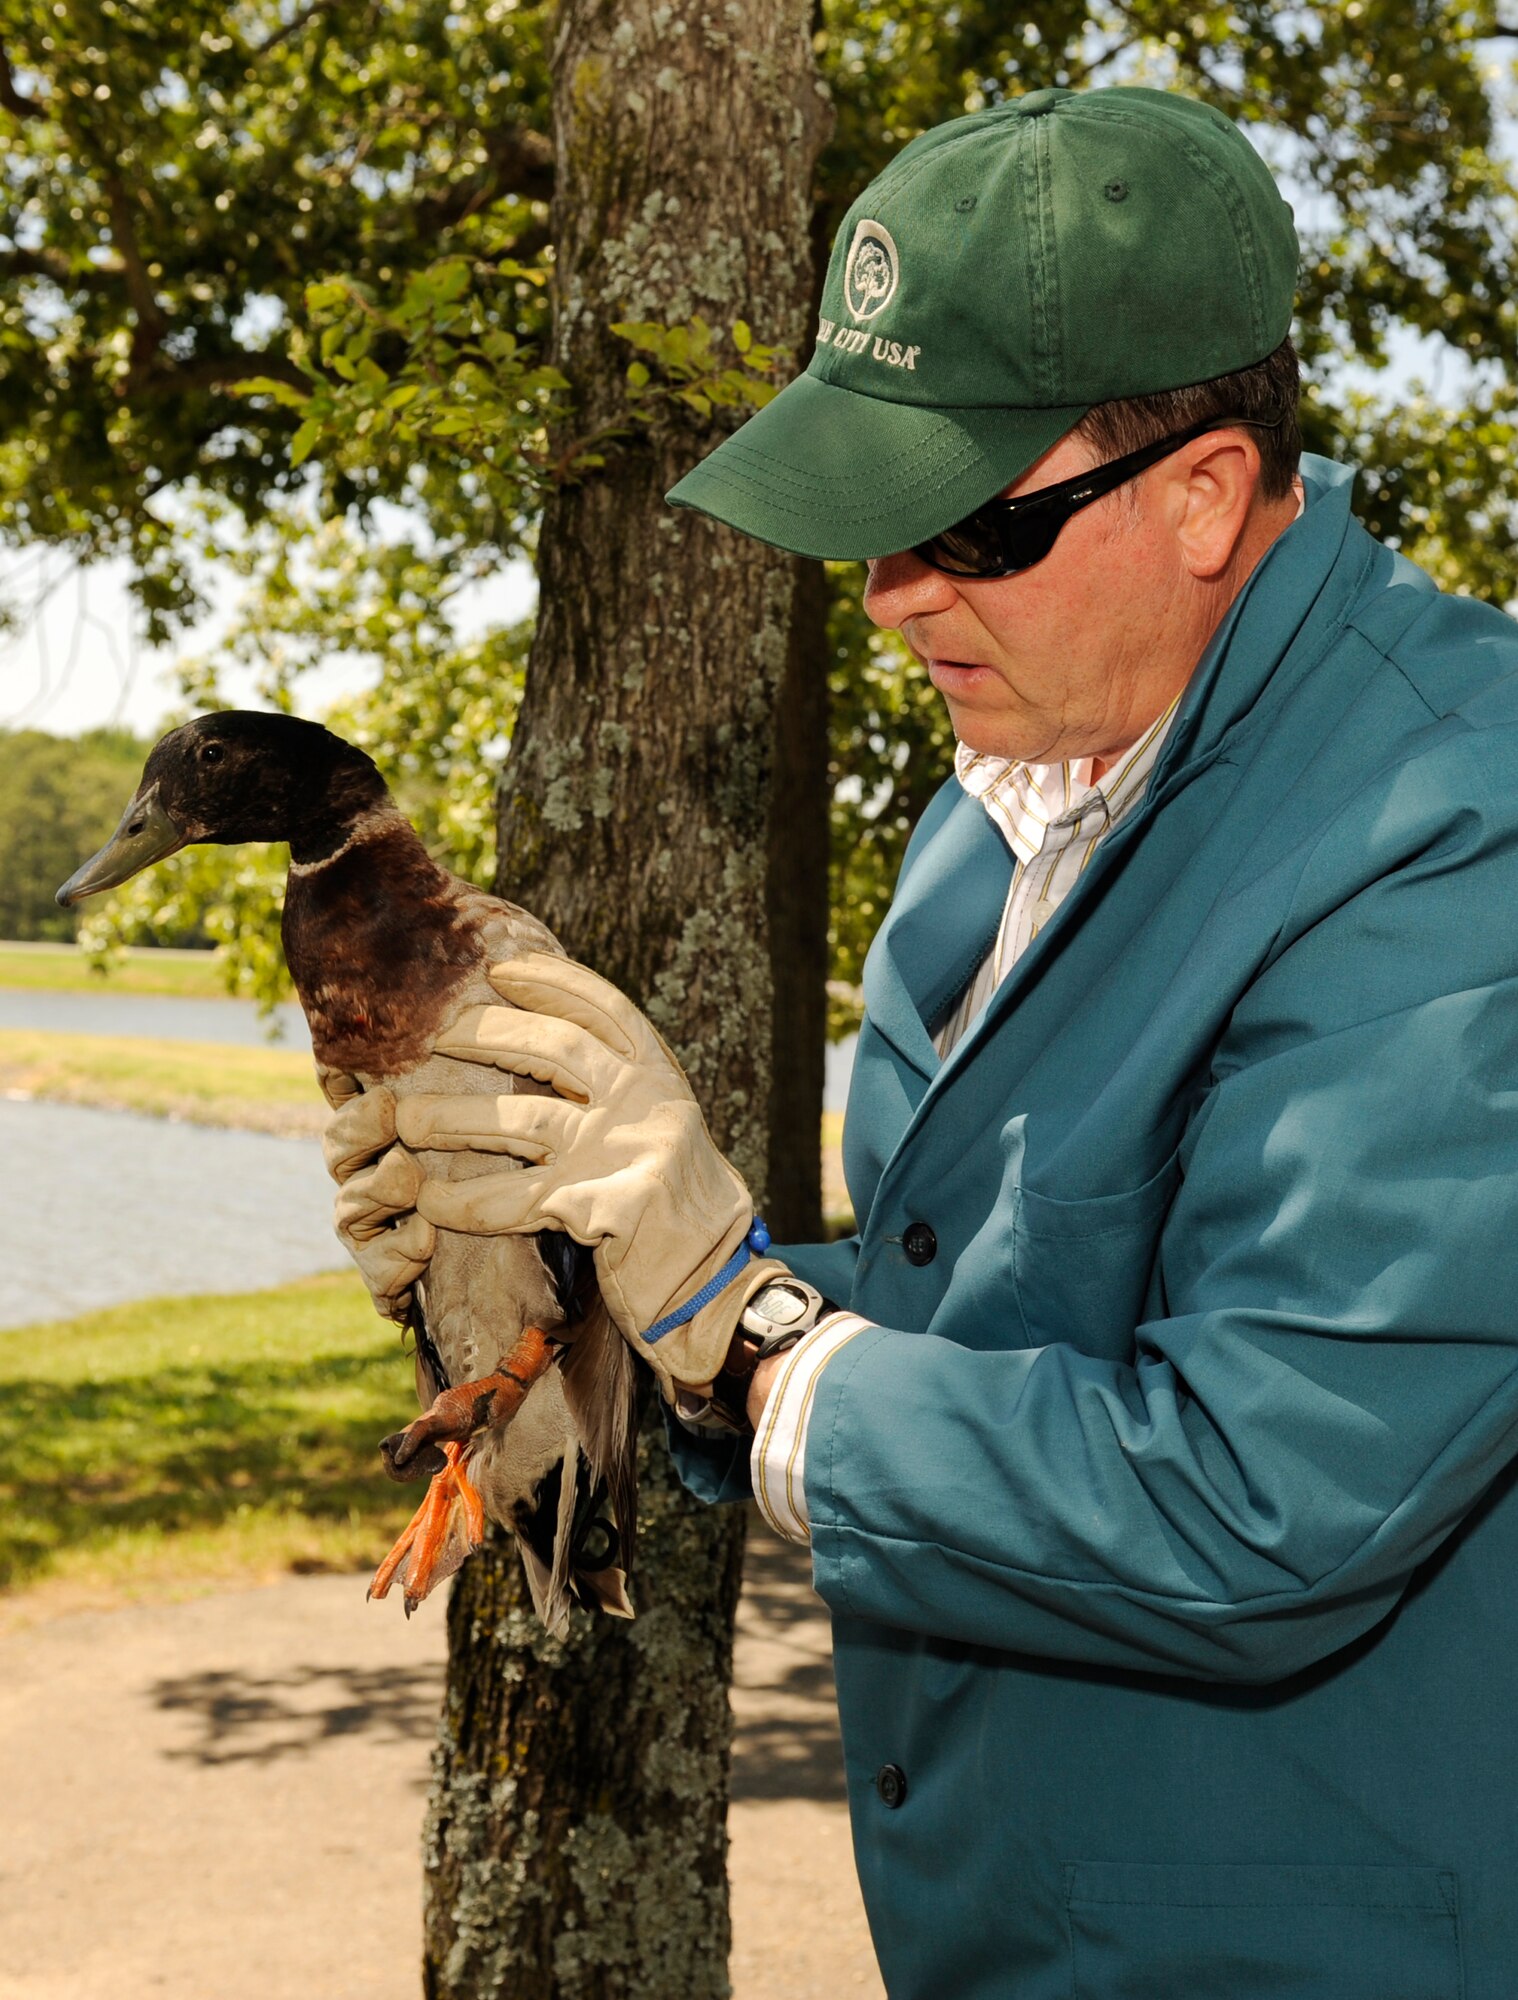 Mr. James Popham, 19th Airlift Wing natural resources manager, assists a wounded duck at the large base lake June 18. The duck was taken to a veterinarian for medical analysis. (U.S. Air Force photo by Airman Lausanne Pacheco)